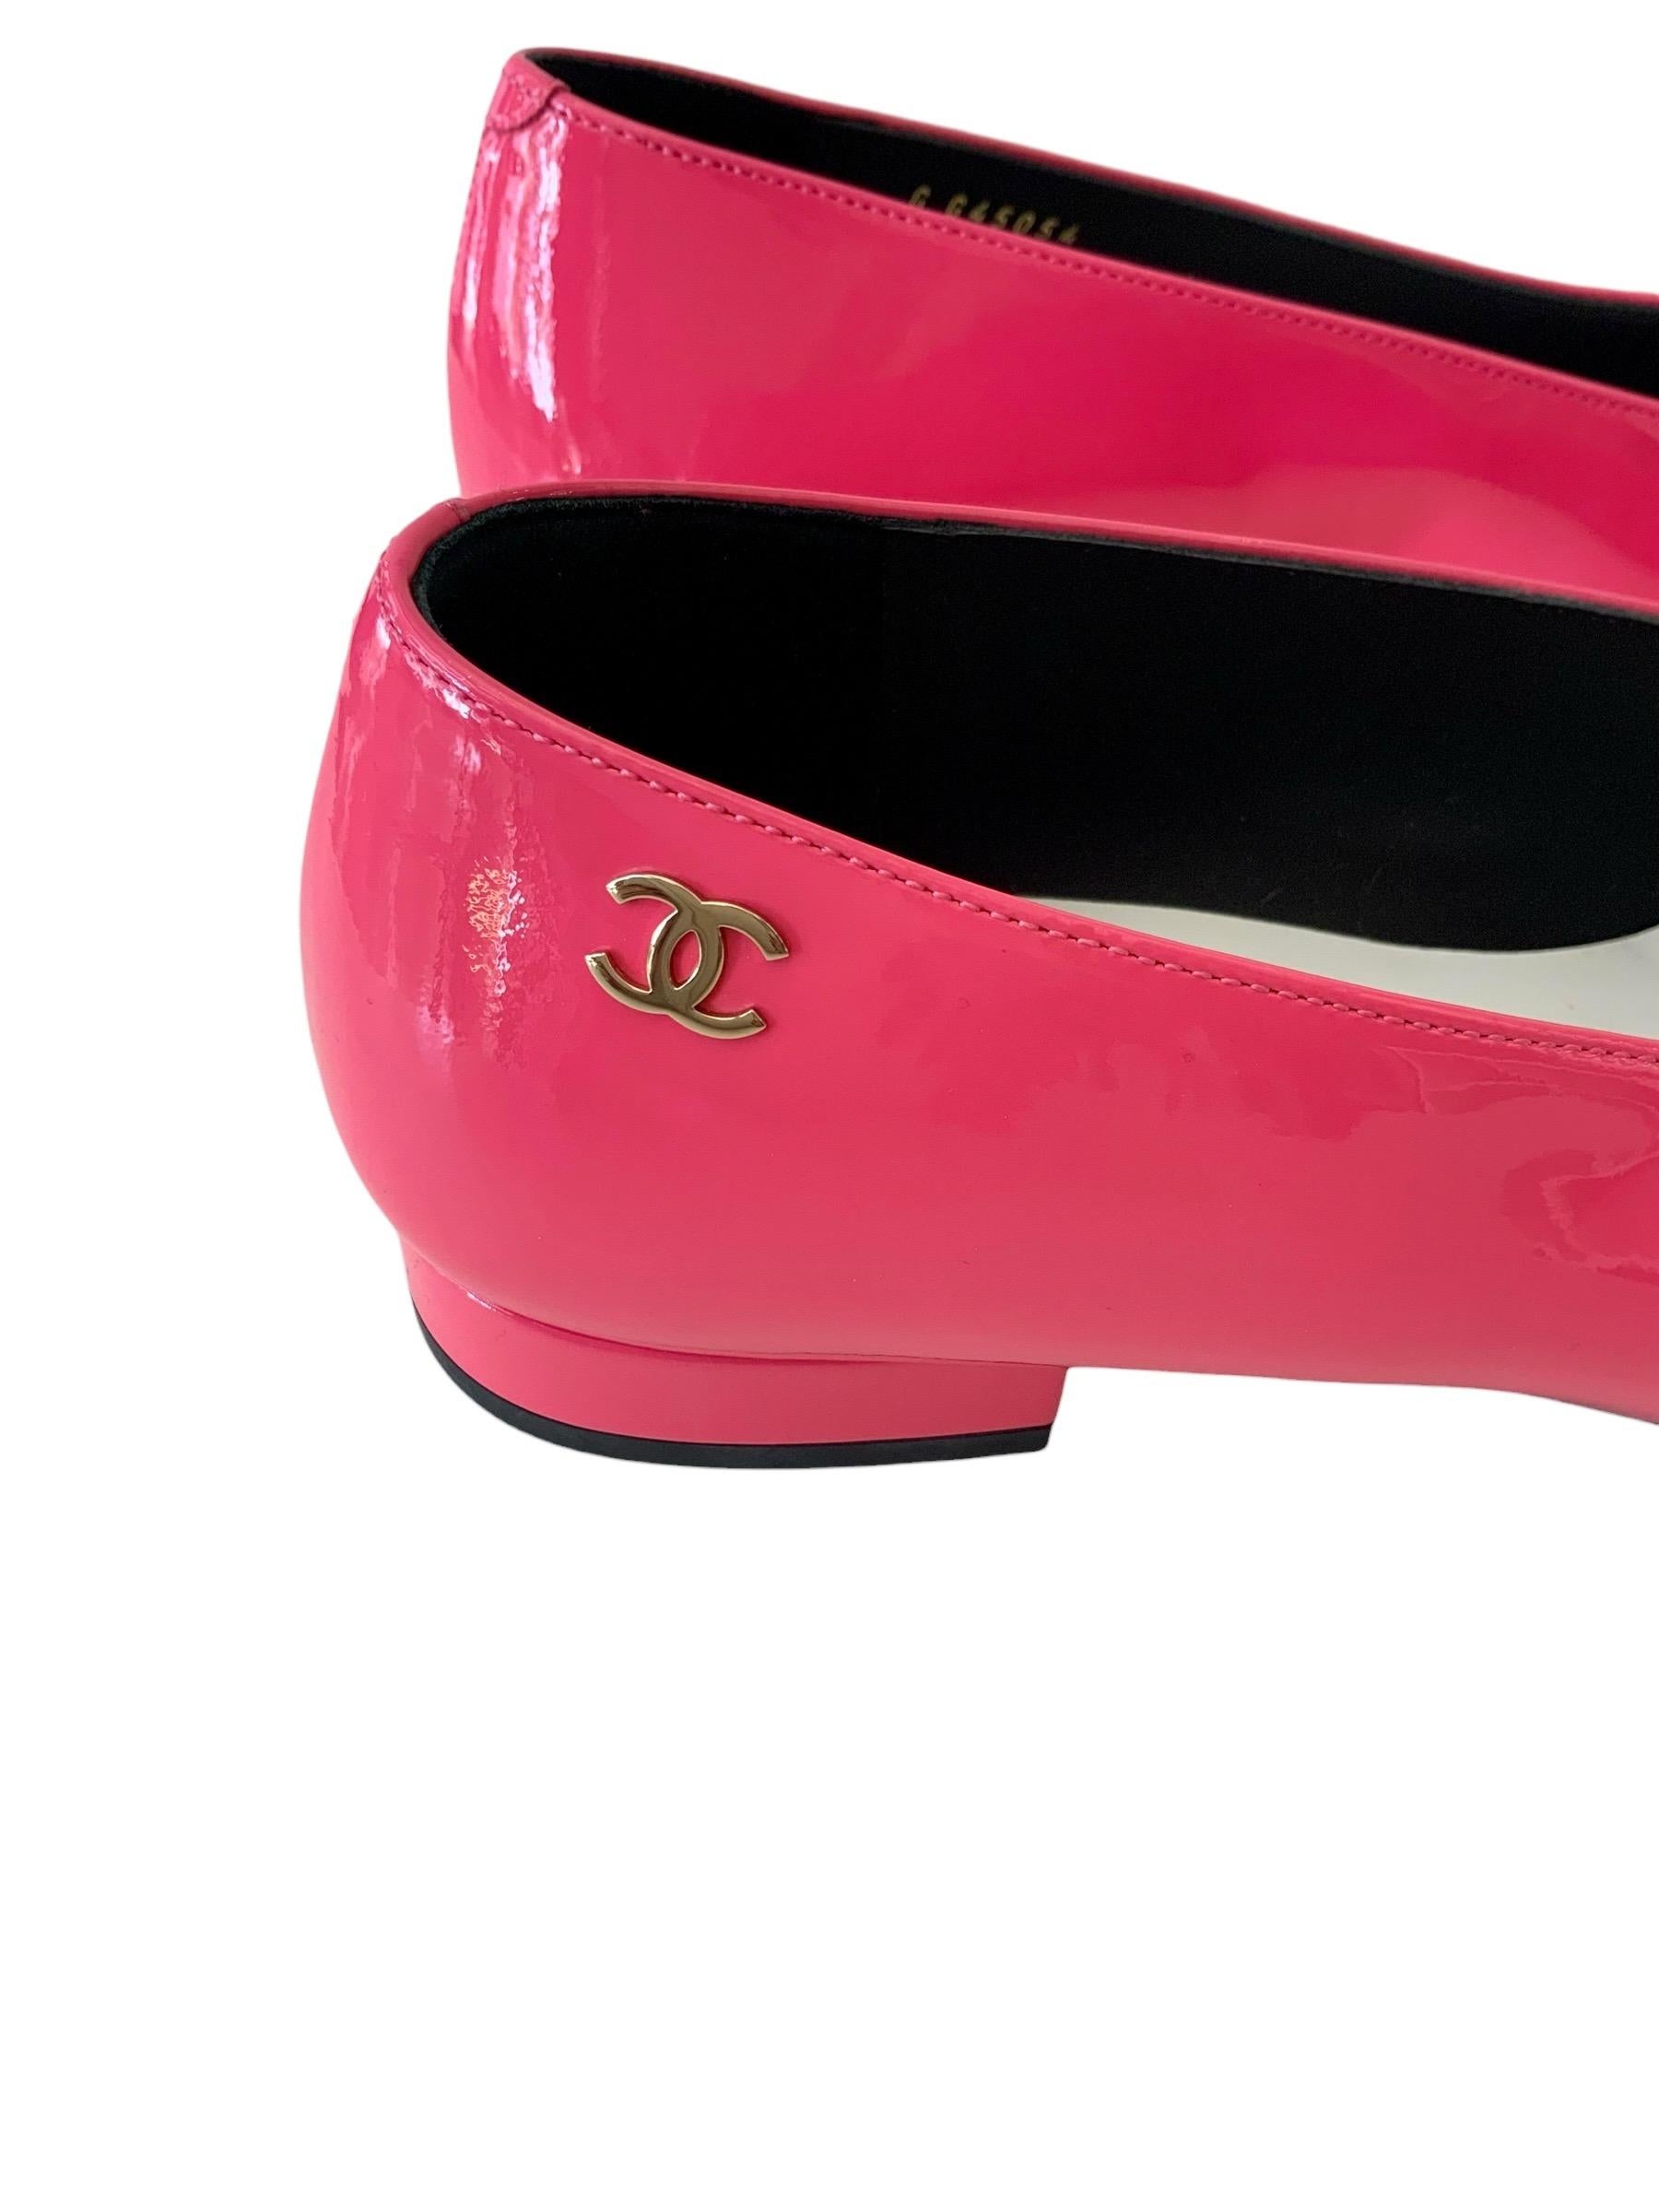 Hot pink patent ballerinas with black patent cap from the house of Chanel. 
A must for this summer.....
Never worn !

Material: Patent leather
Color: Pink and black
Sole: Black leather
Size: 38C
Heel: 1.9cms - approx. 0.74